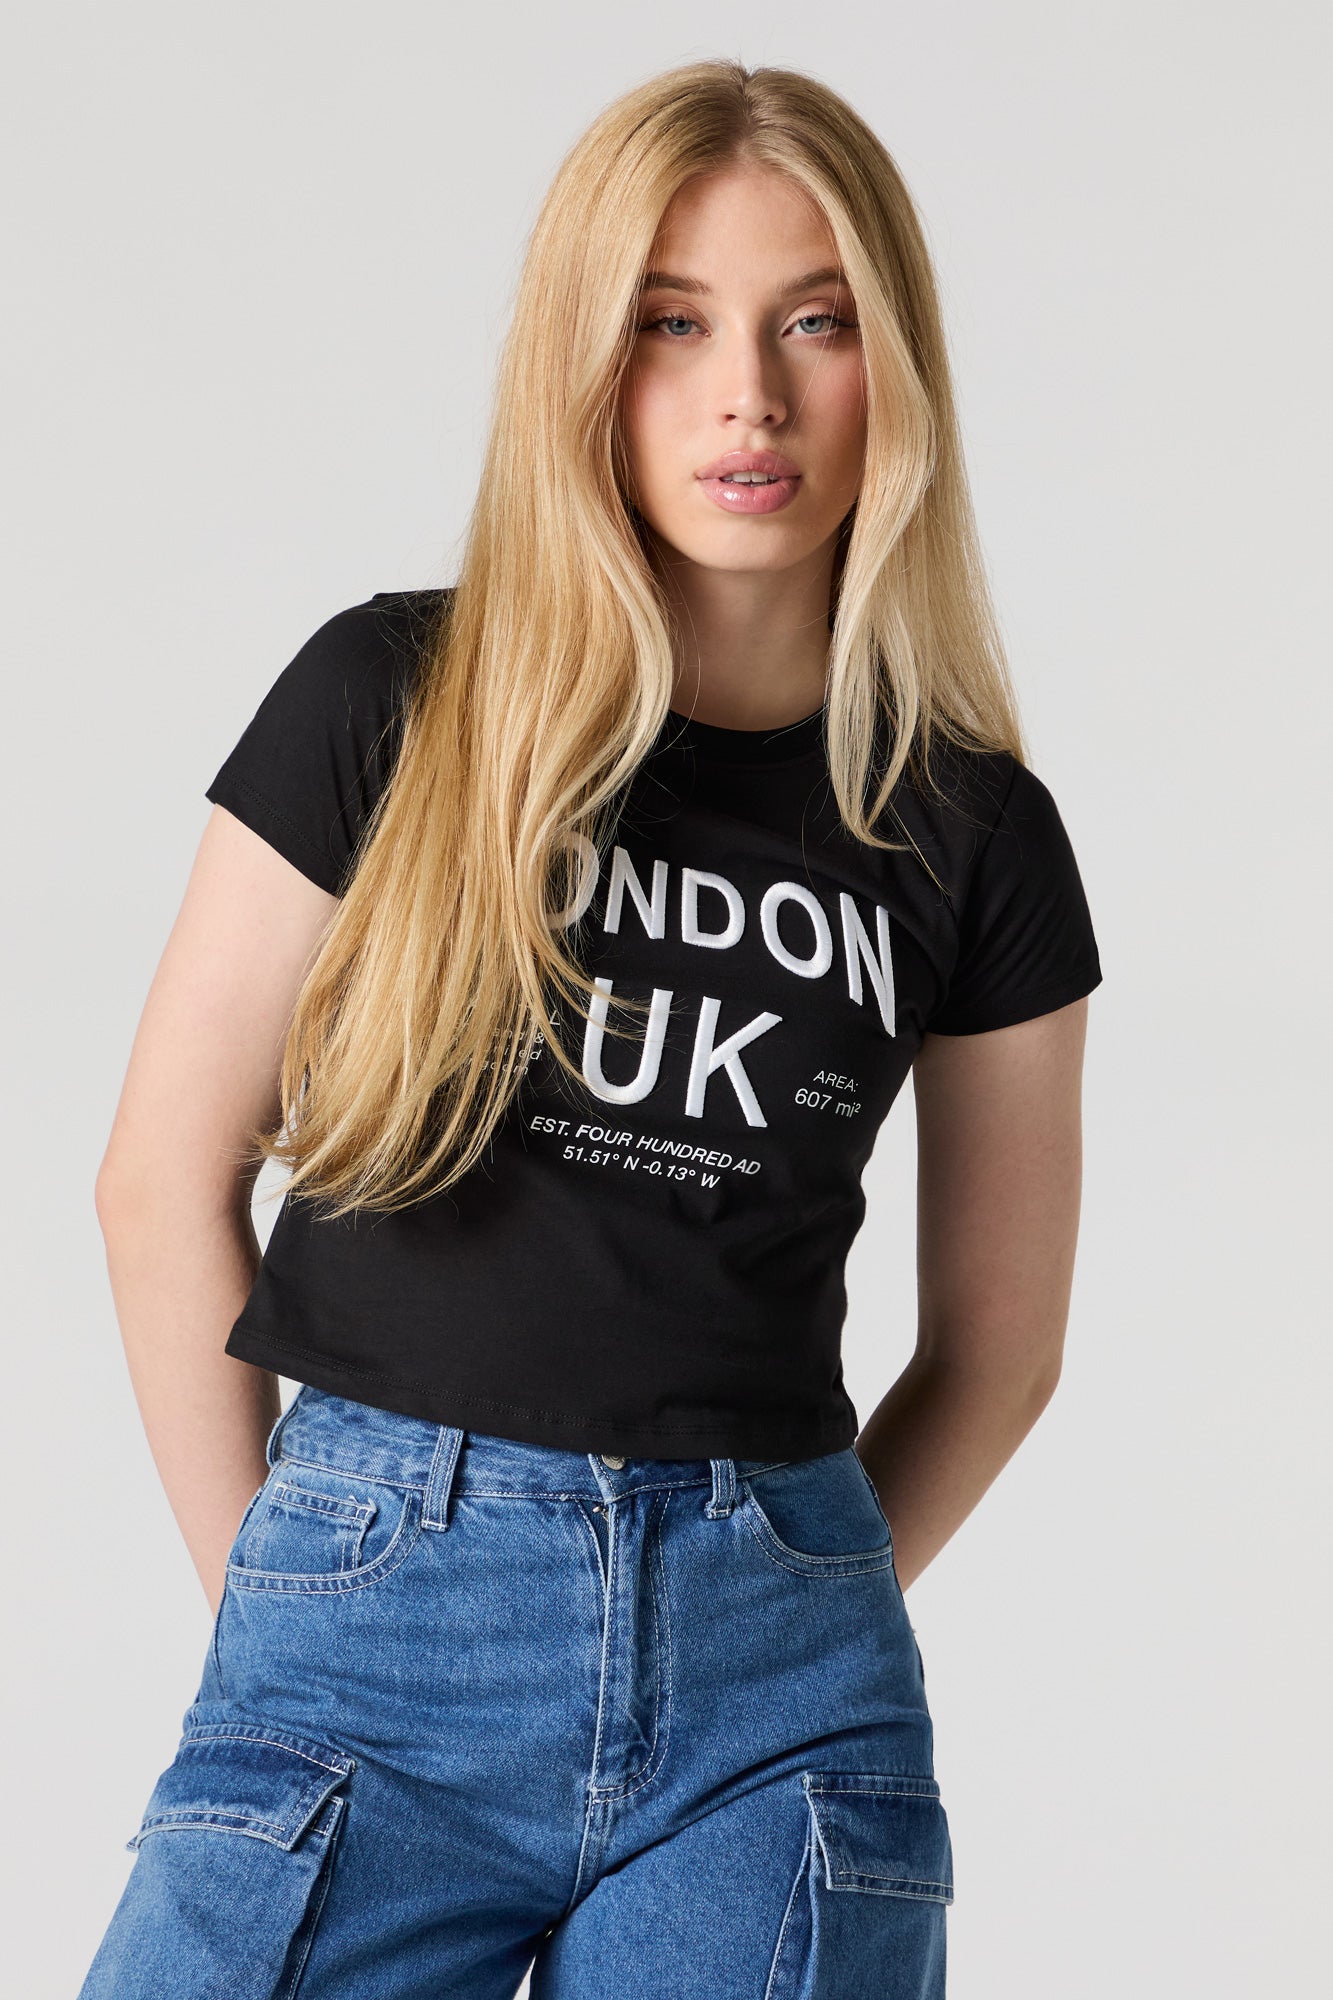 London UK Embroidered Baby T-Shirt